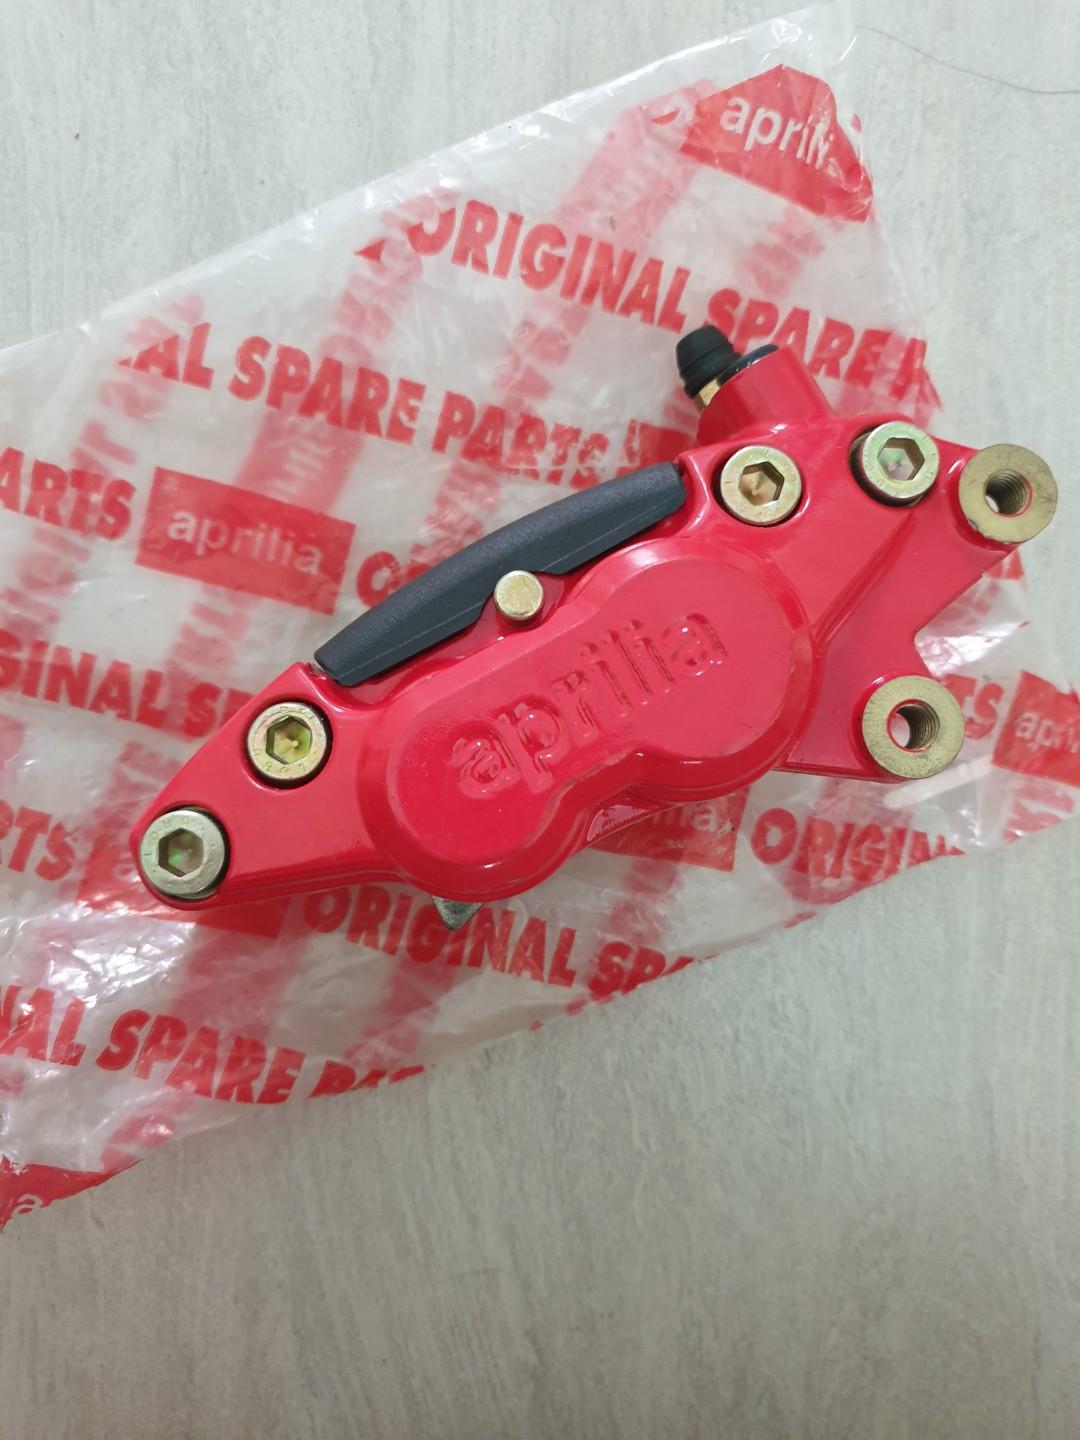 Aprilia caliper, Motorcycles, Motorcycle Accessories on Carousell